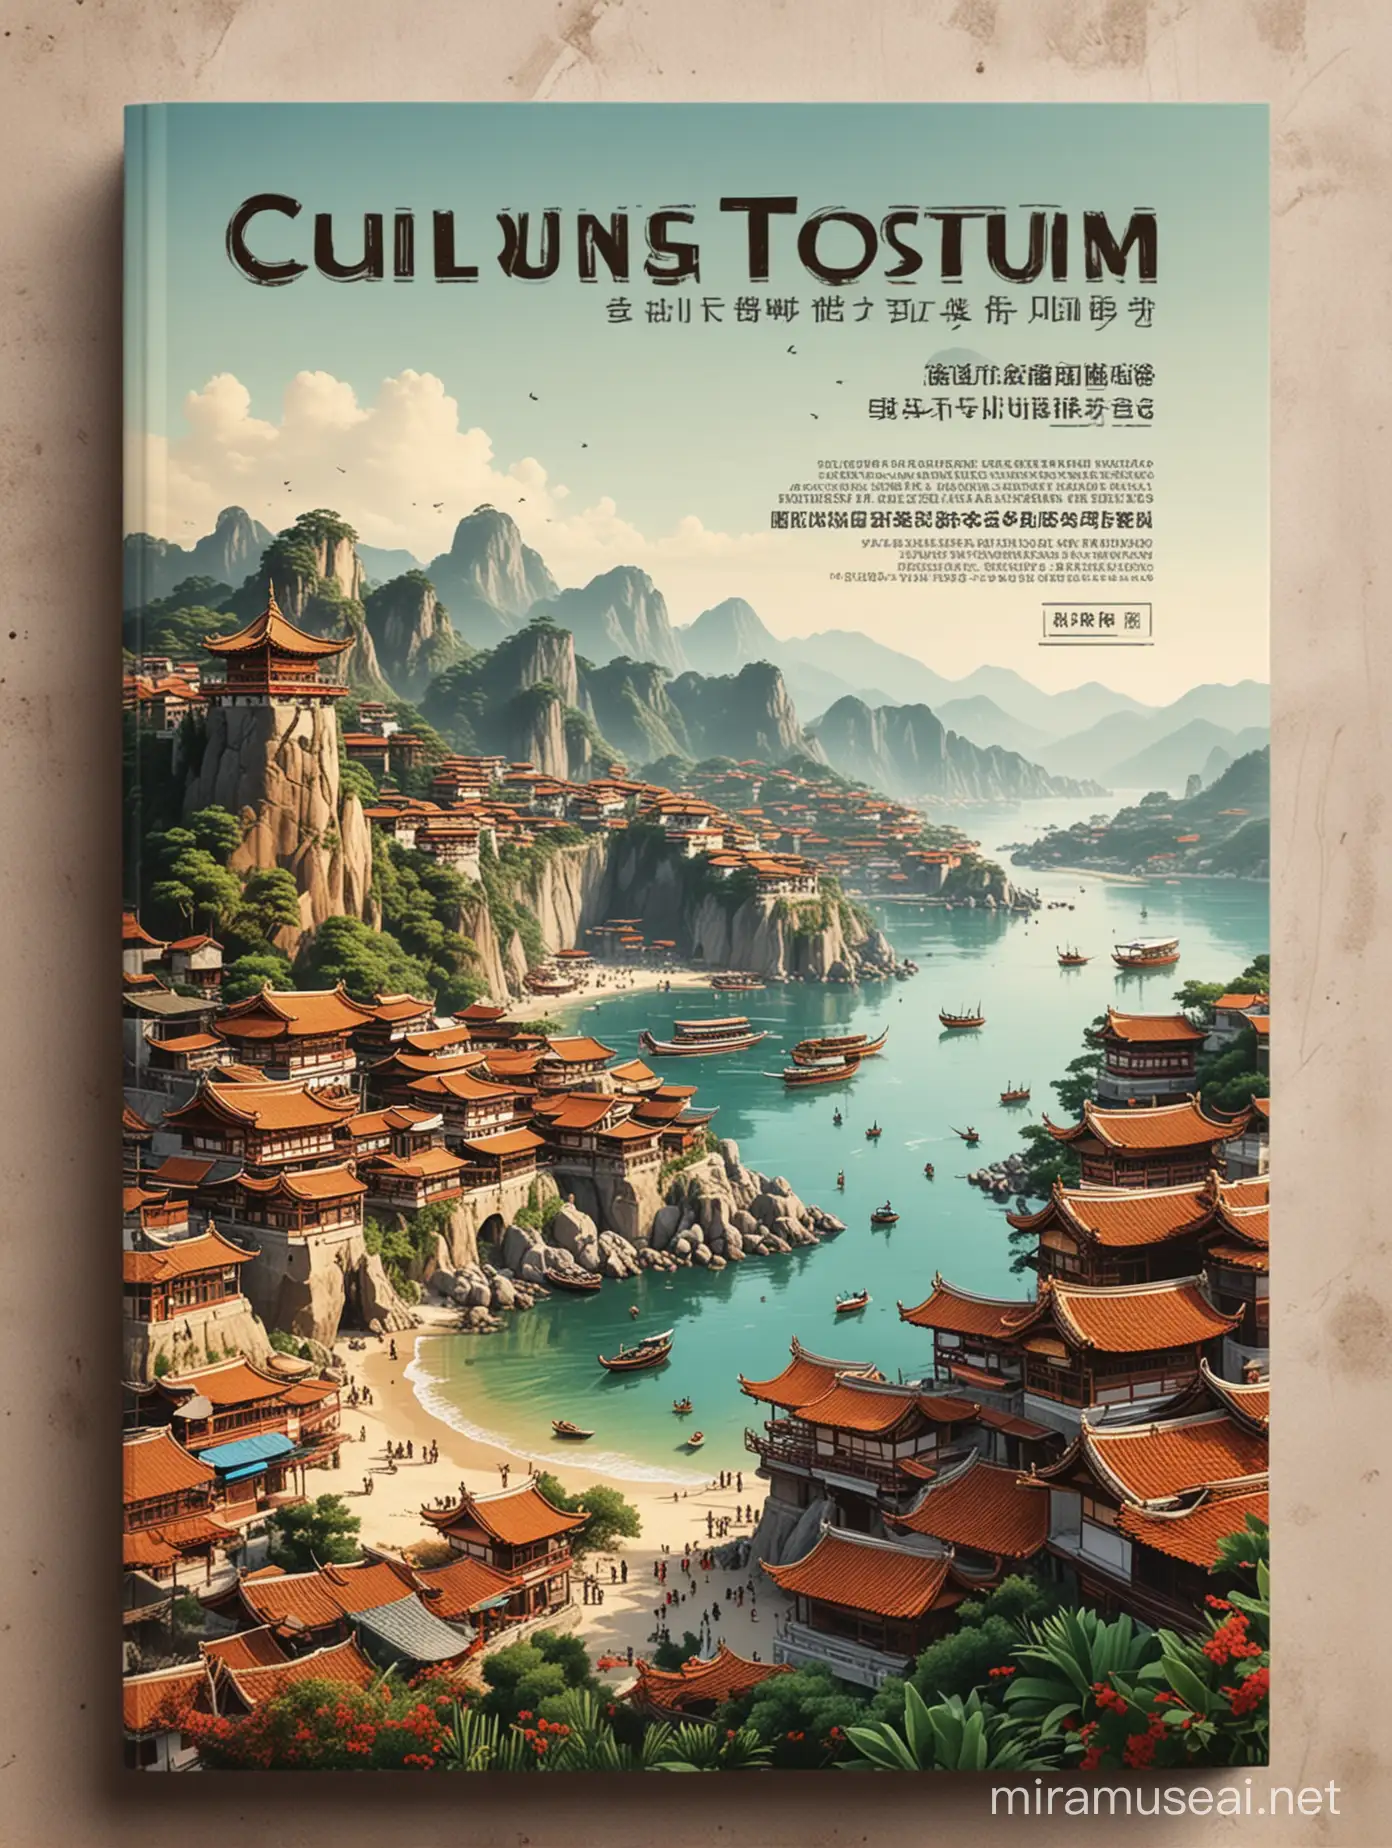 Vibrant Cultural Tourism Guidebook Cover Featuring Iconic Landmarks and Traditions